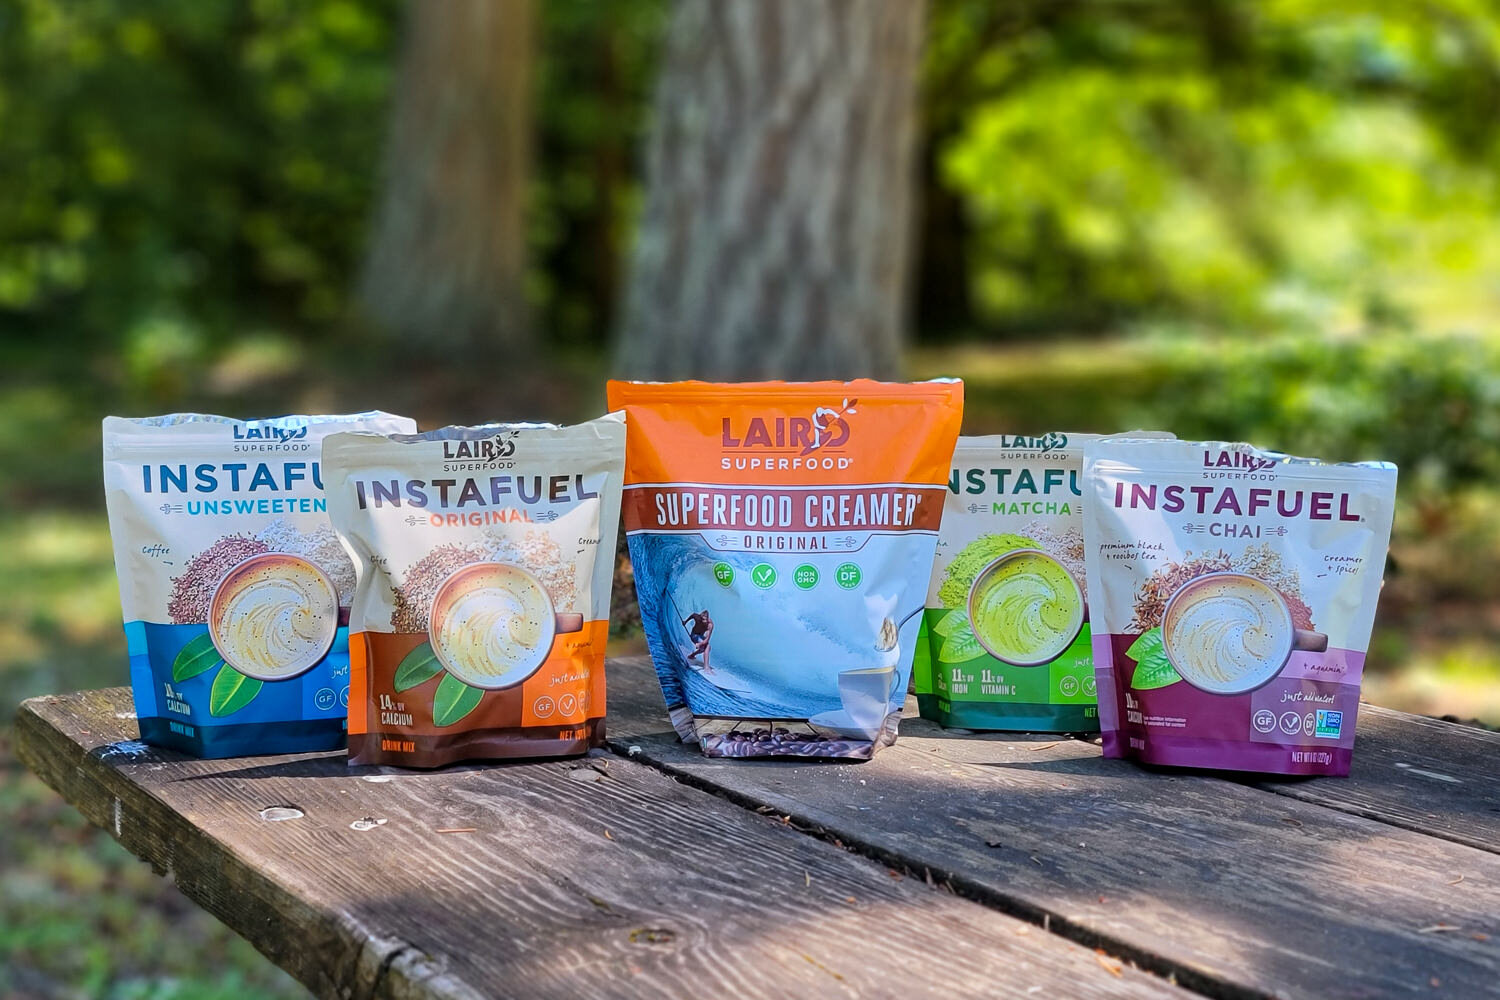 Laird Superfood makes delicious & nutritious Drink mixes including Instafuel, Superfood Creamer & coconut water